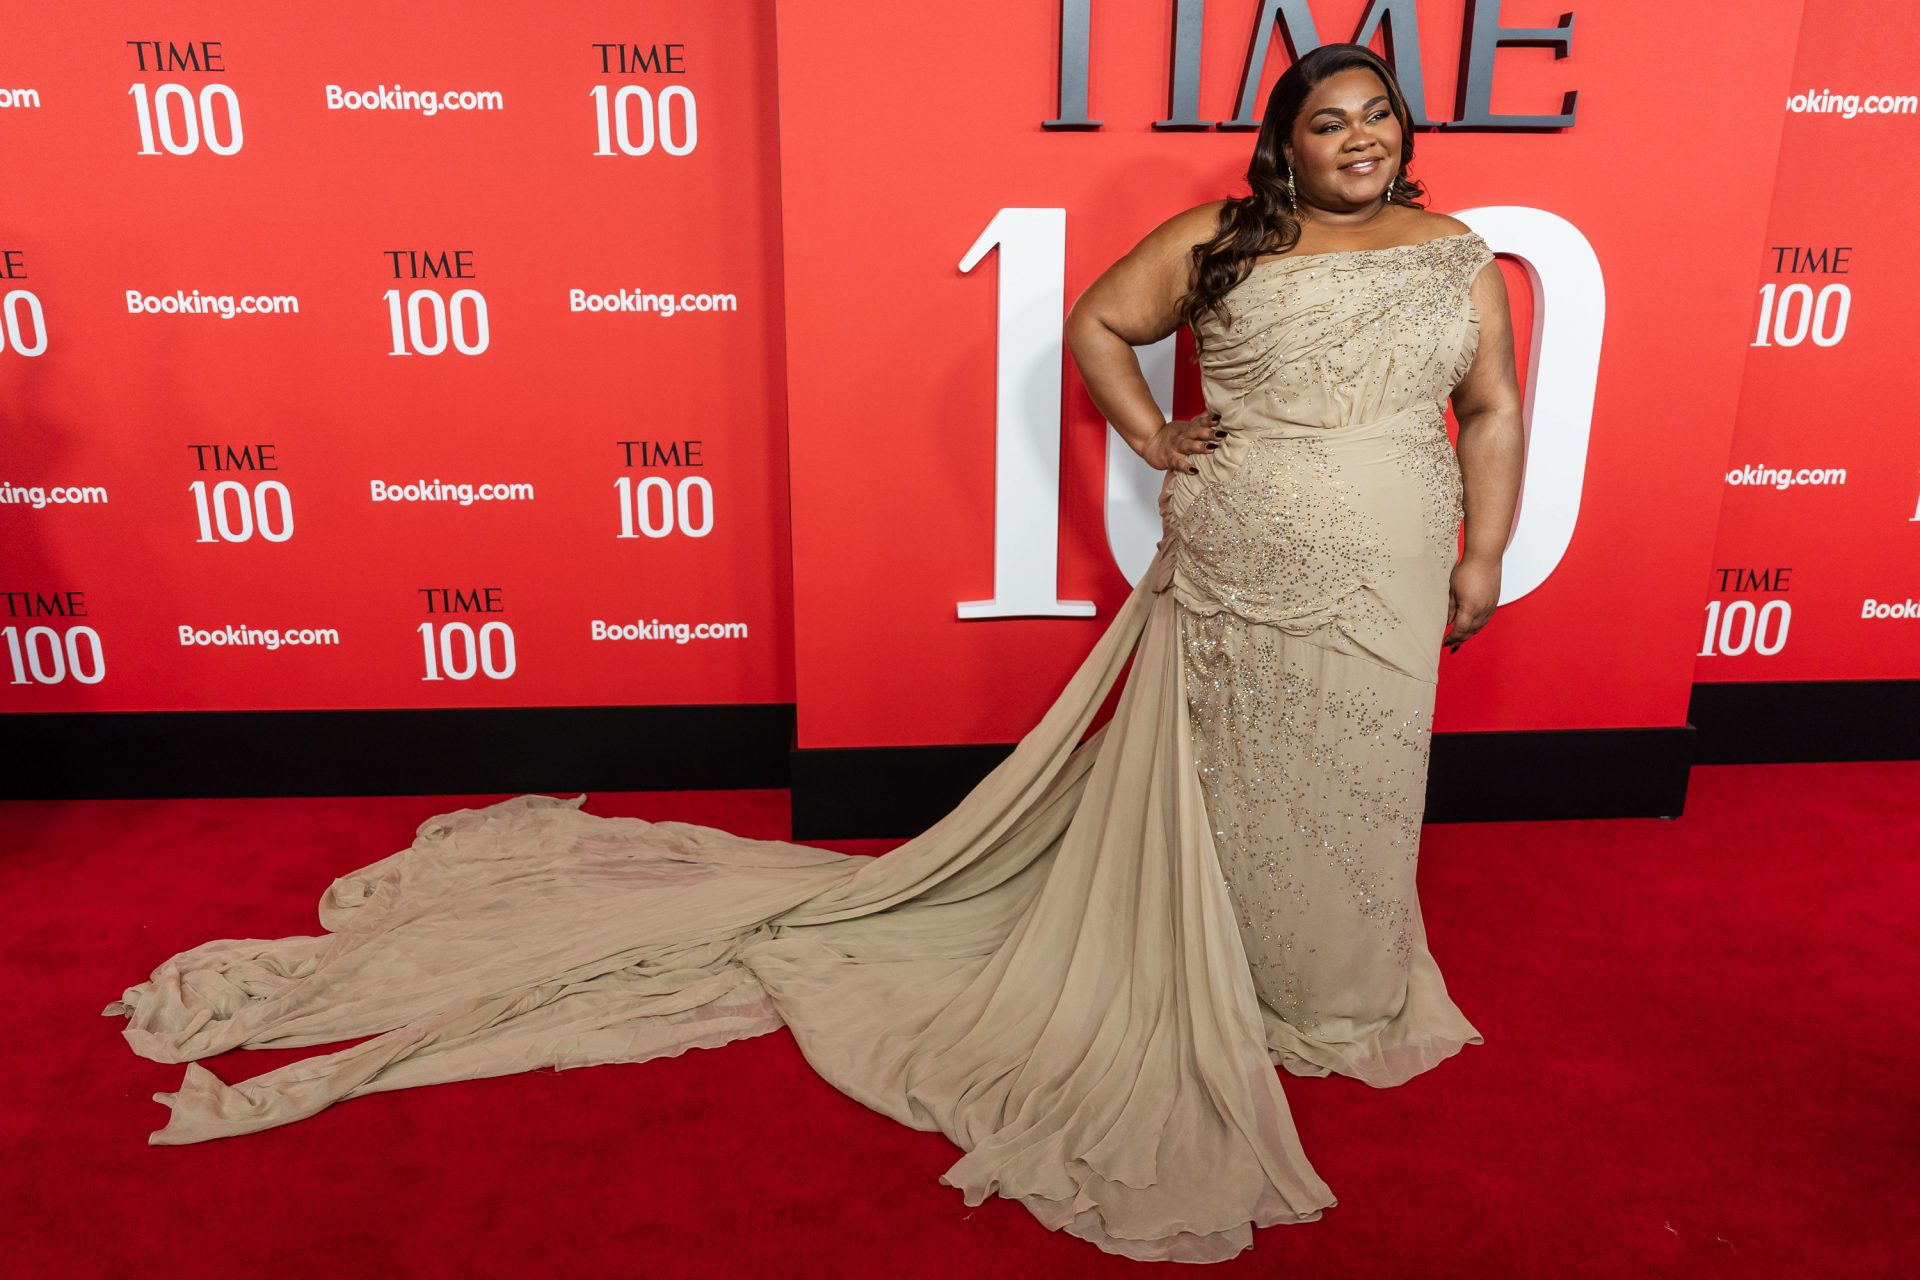 Stars at the TIME 100 party: best and worst looks